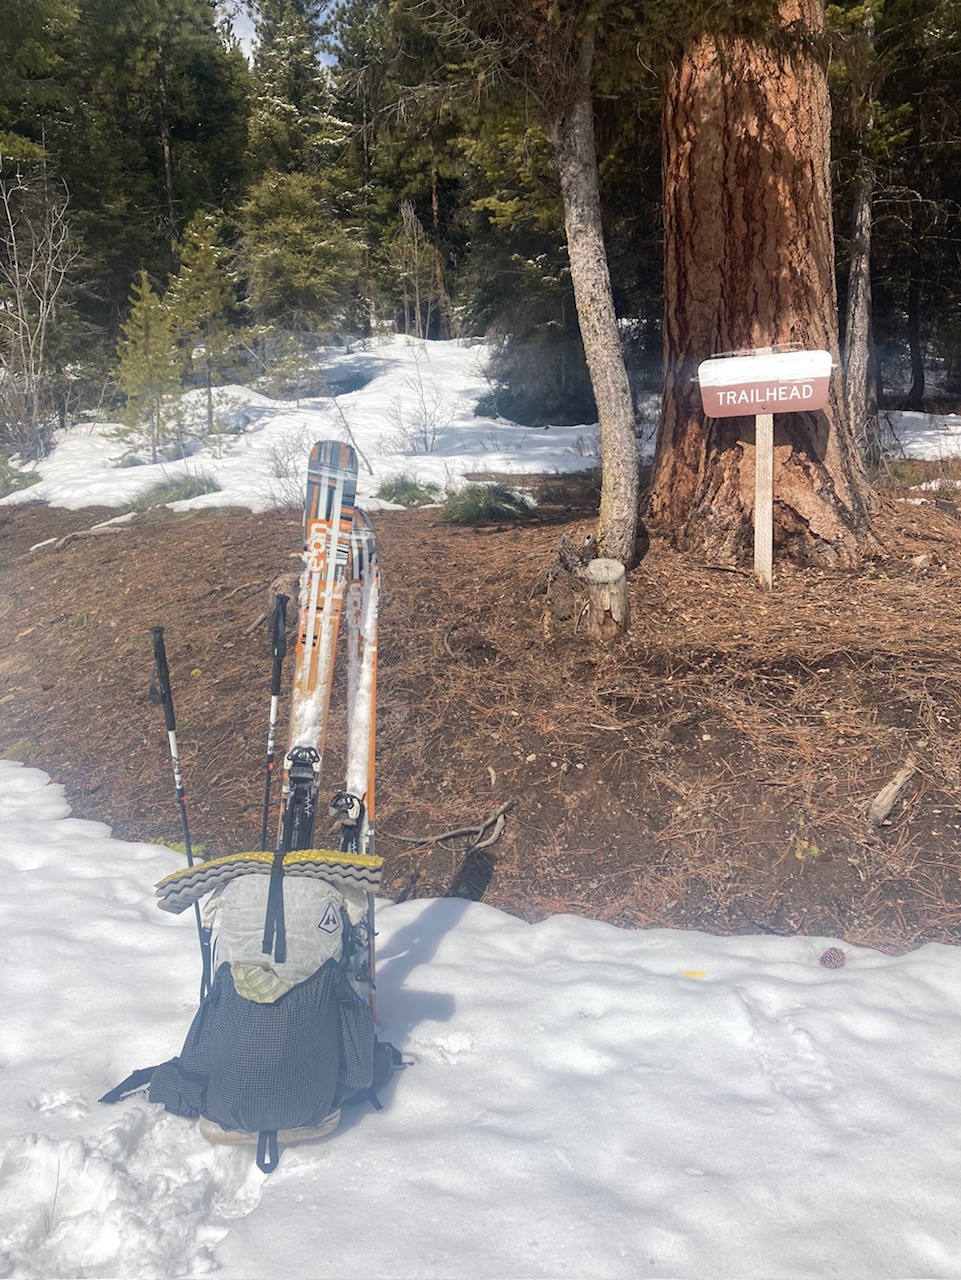 a pair of skis sitting in the snow next to a tree